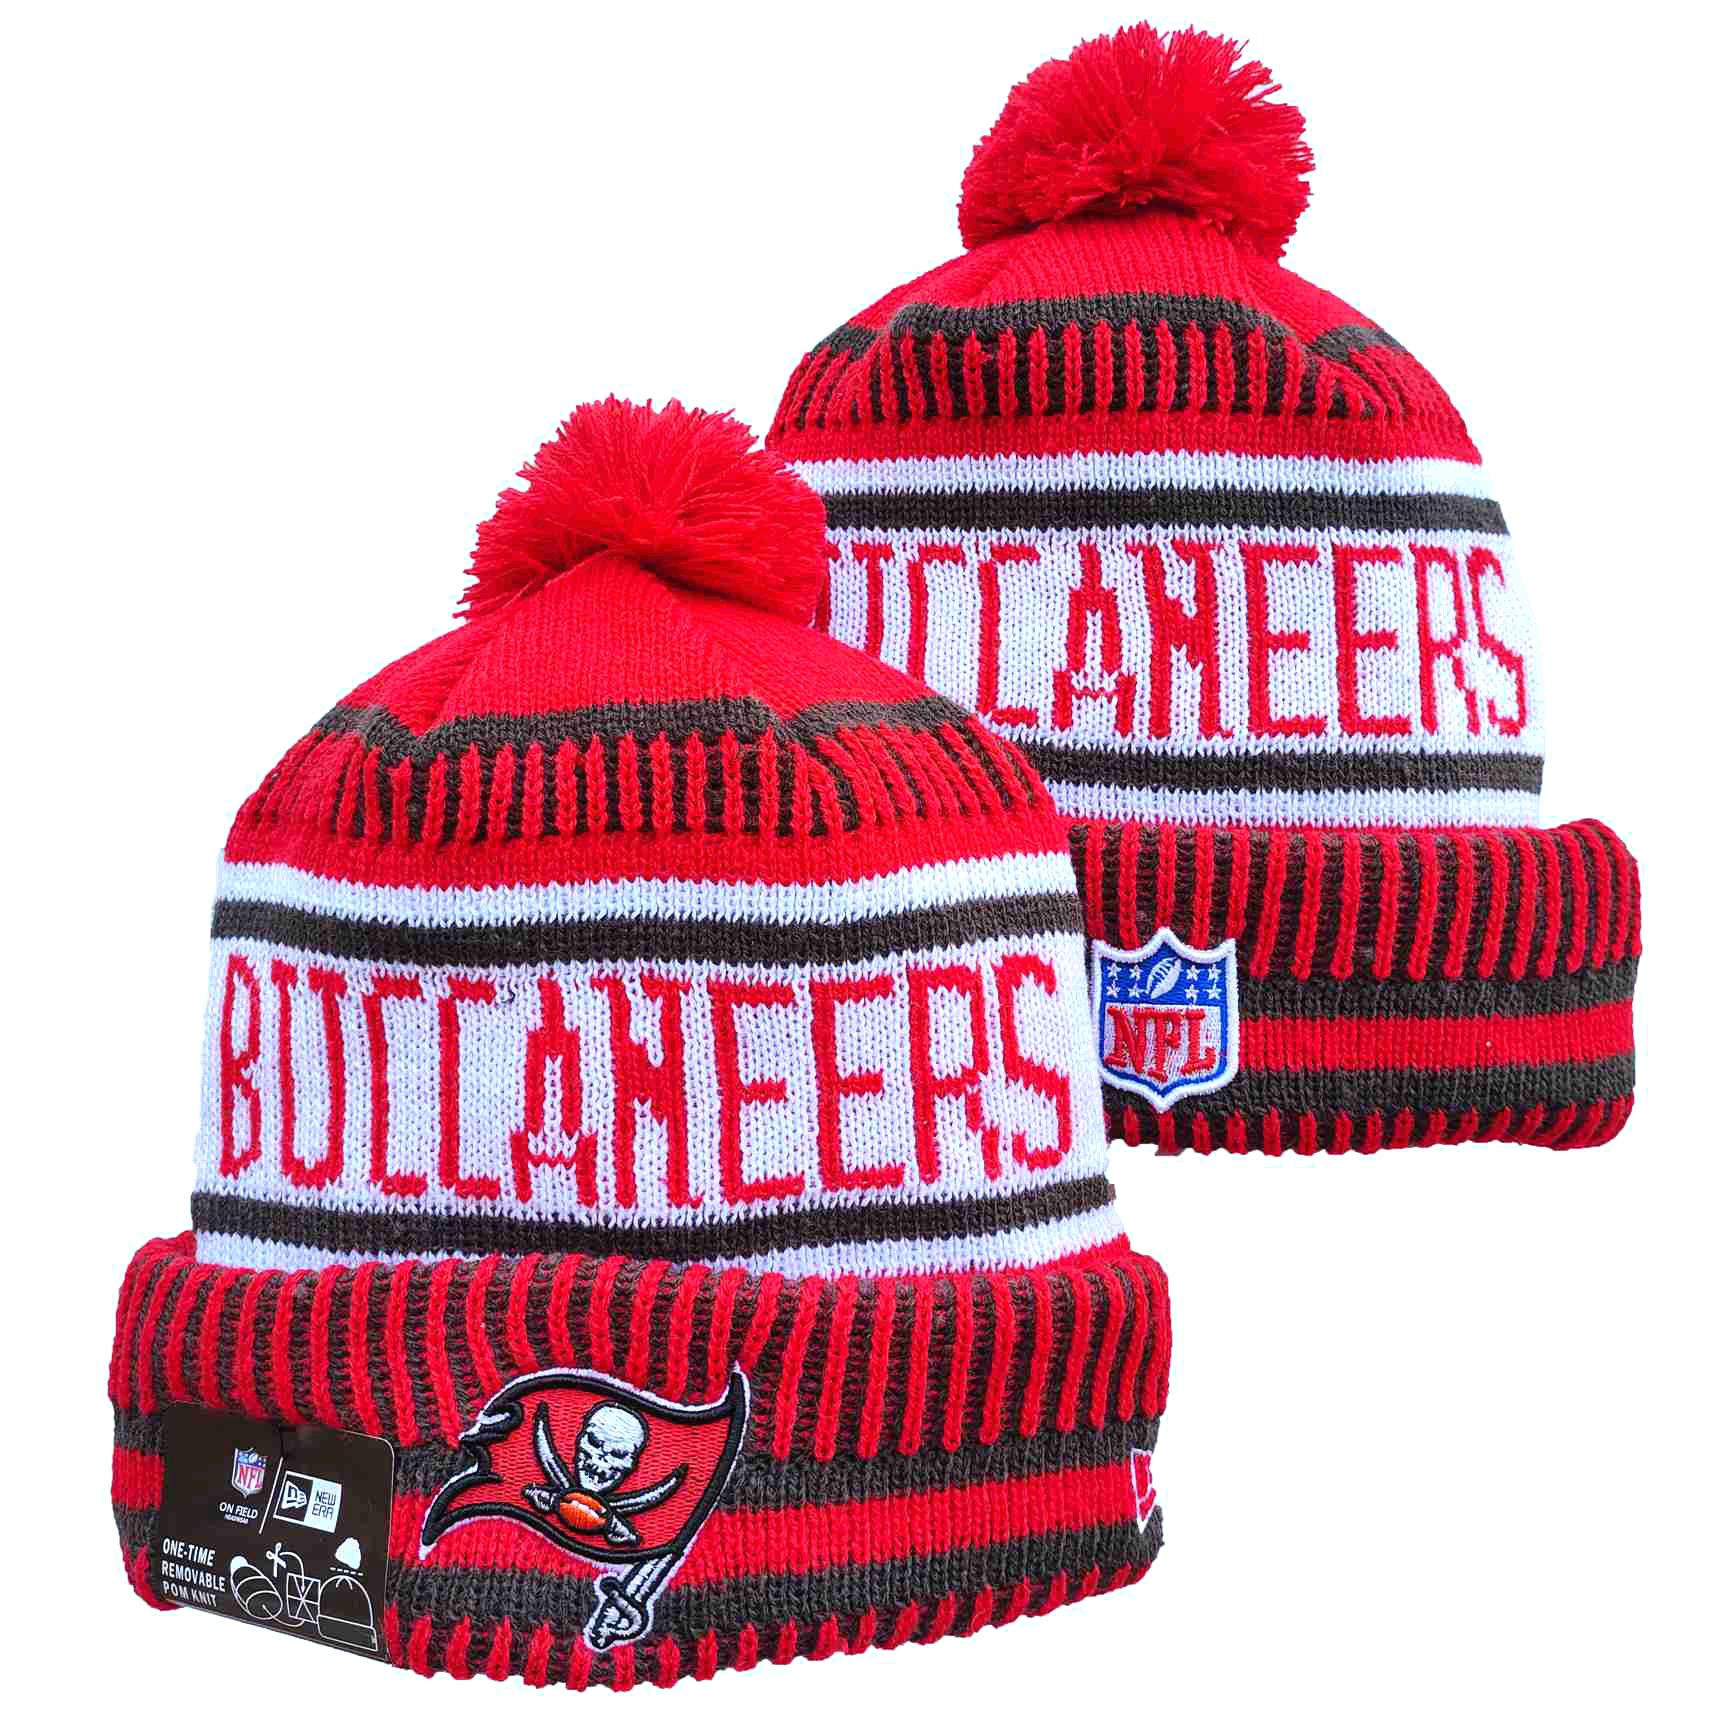 NFL Tampa Bay Buccaneers Beanies Knit Hats-YD1293